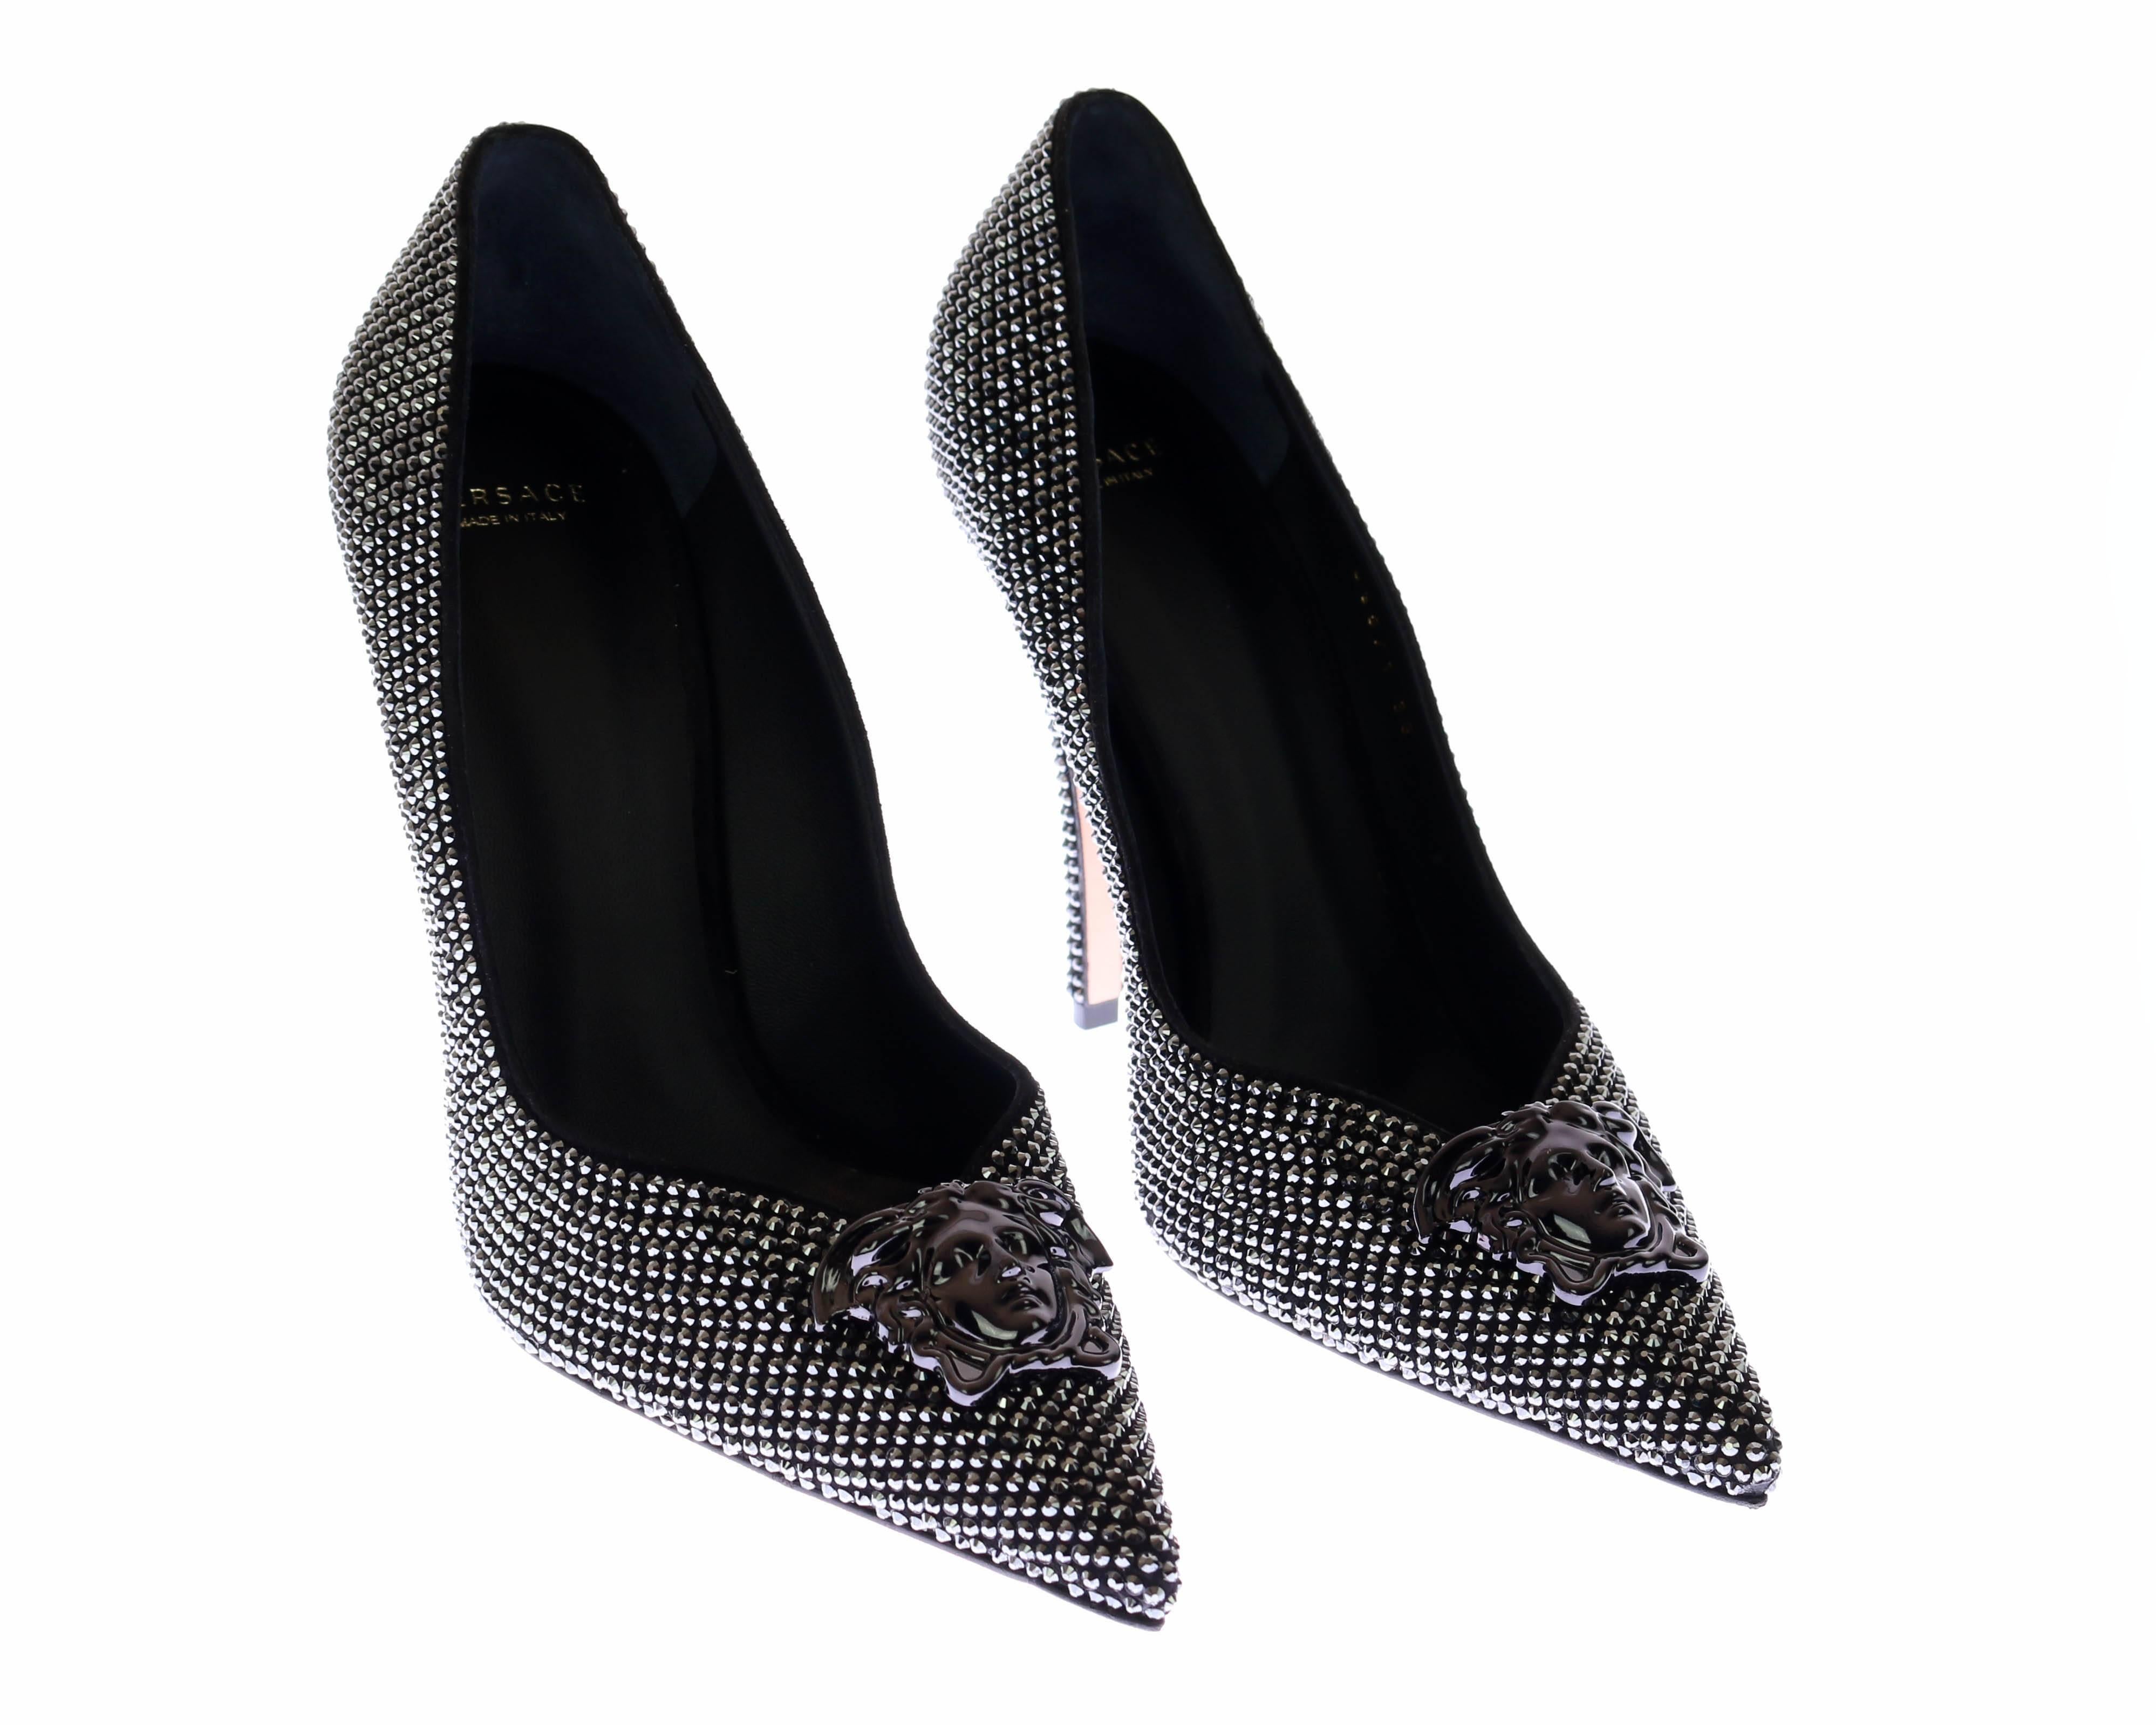 Versace 

Palazzo Pump

Color: Black

Fully covered with Swarovski crystals

Made in Italy

IT Size 39 - US 9

Brand new, in the box.

  